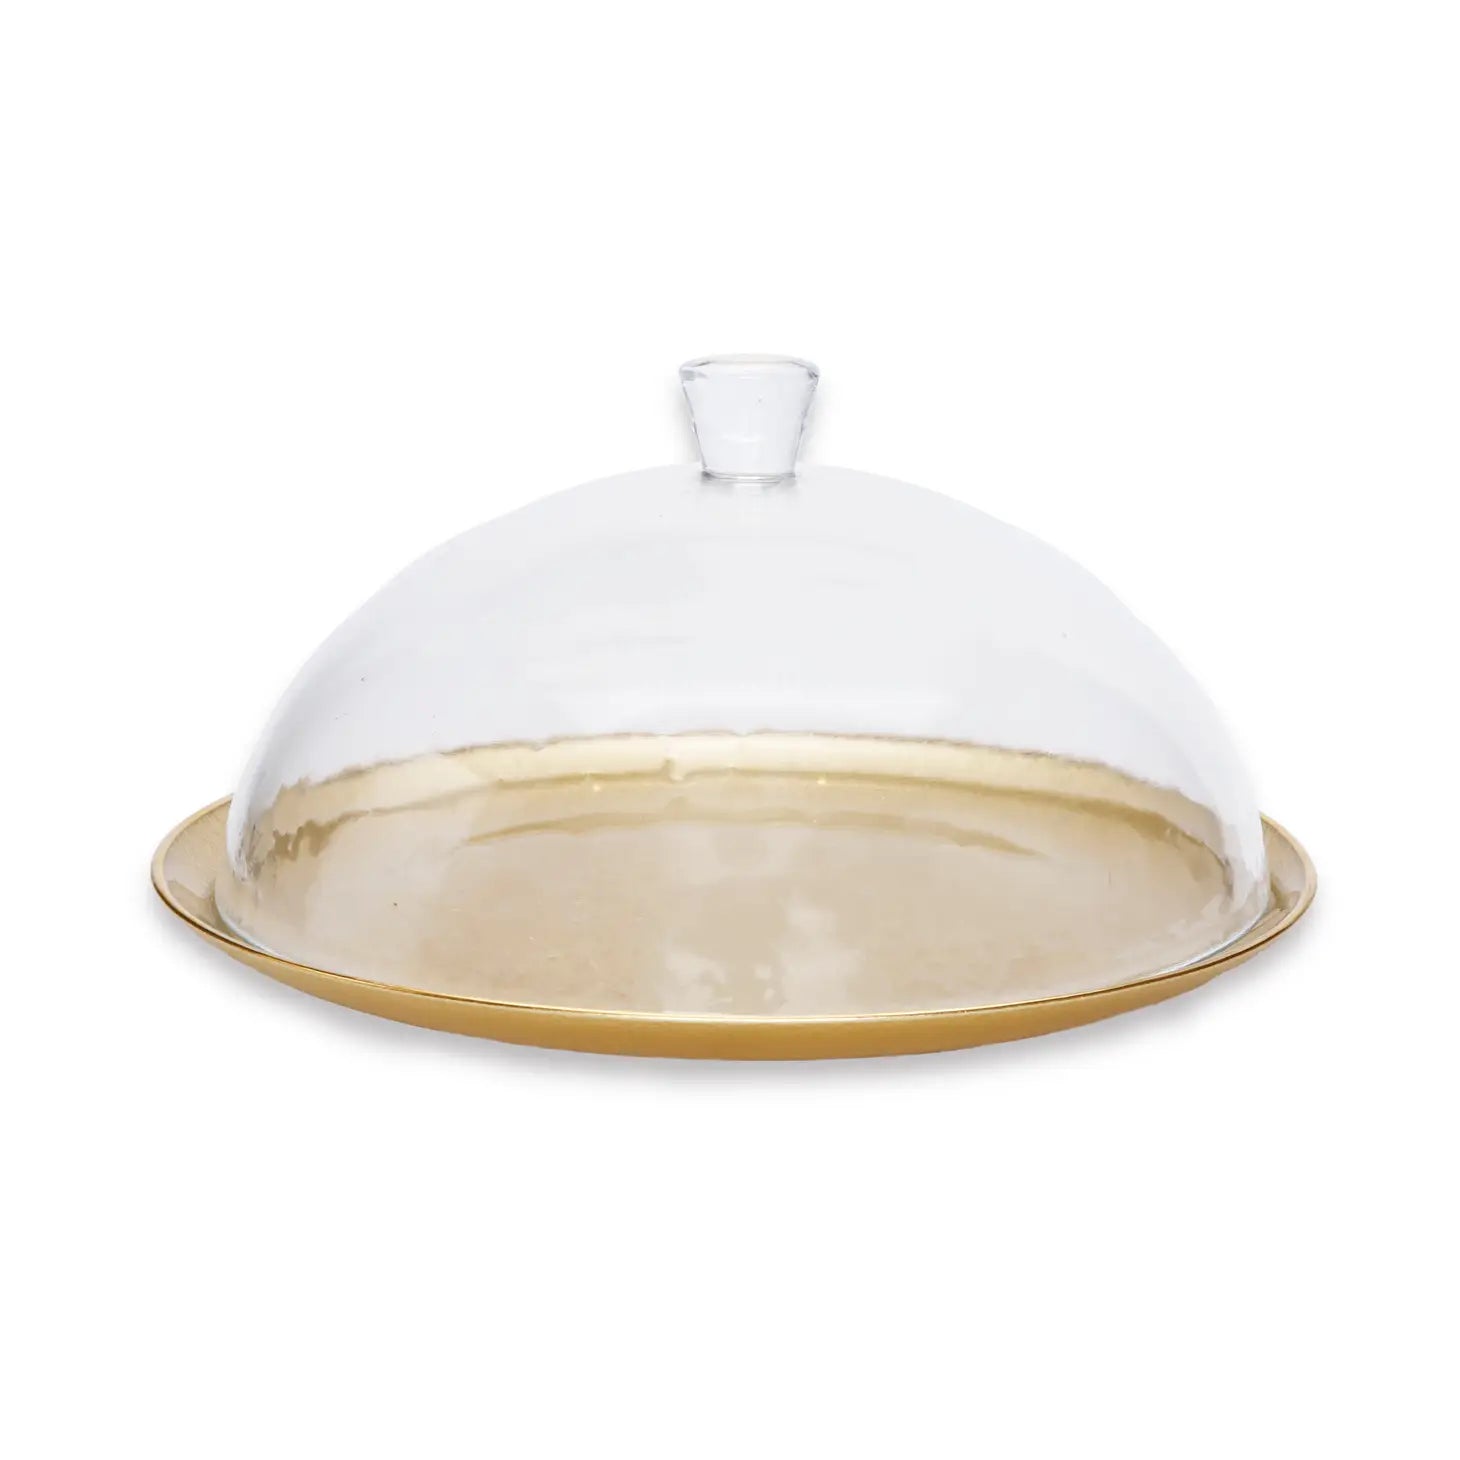 Gold Cake Plate with Glass Dome